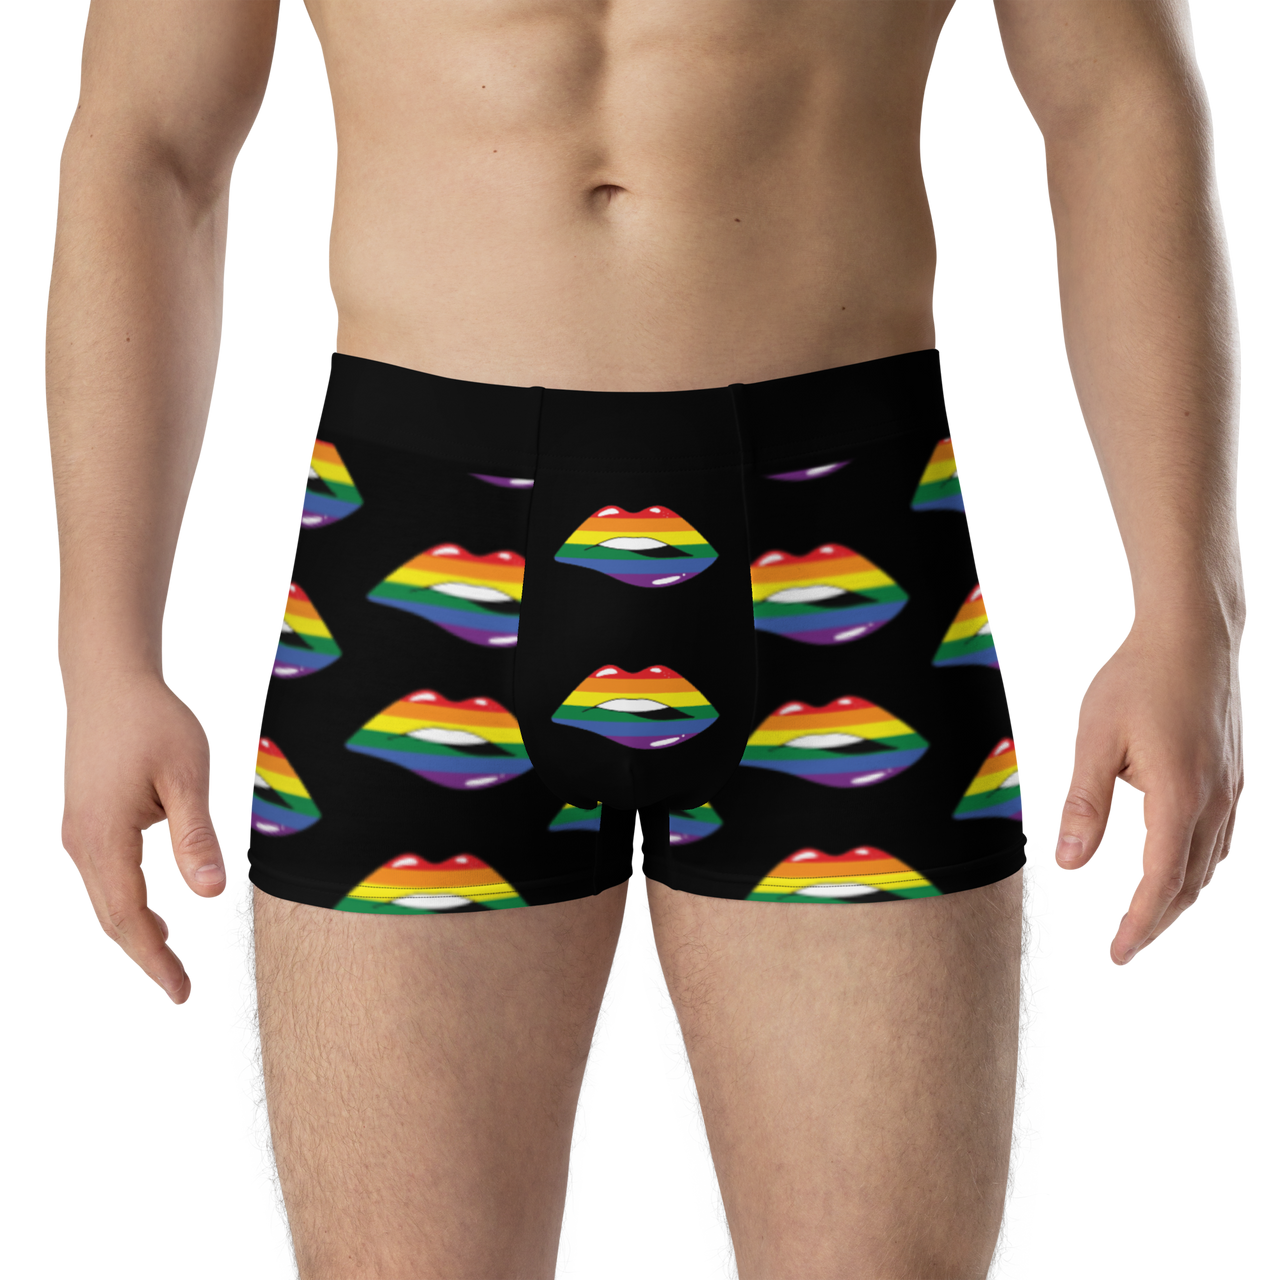 LGBTQ Flag Kisses Underwear for Her/Him or They/Them - Black SHAVA